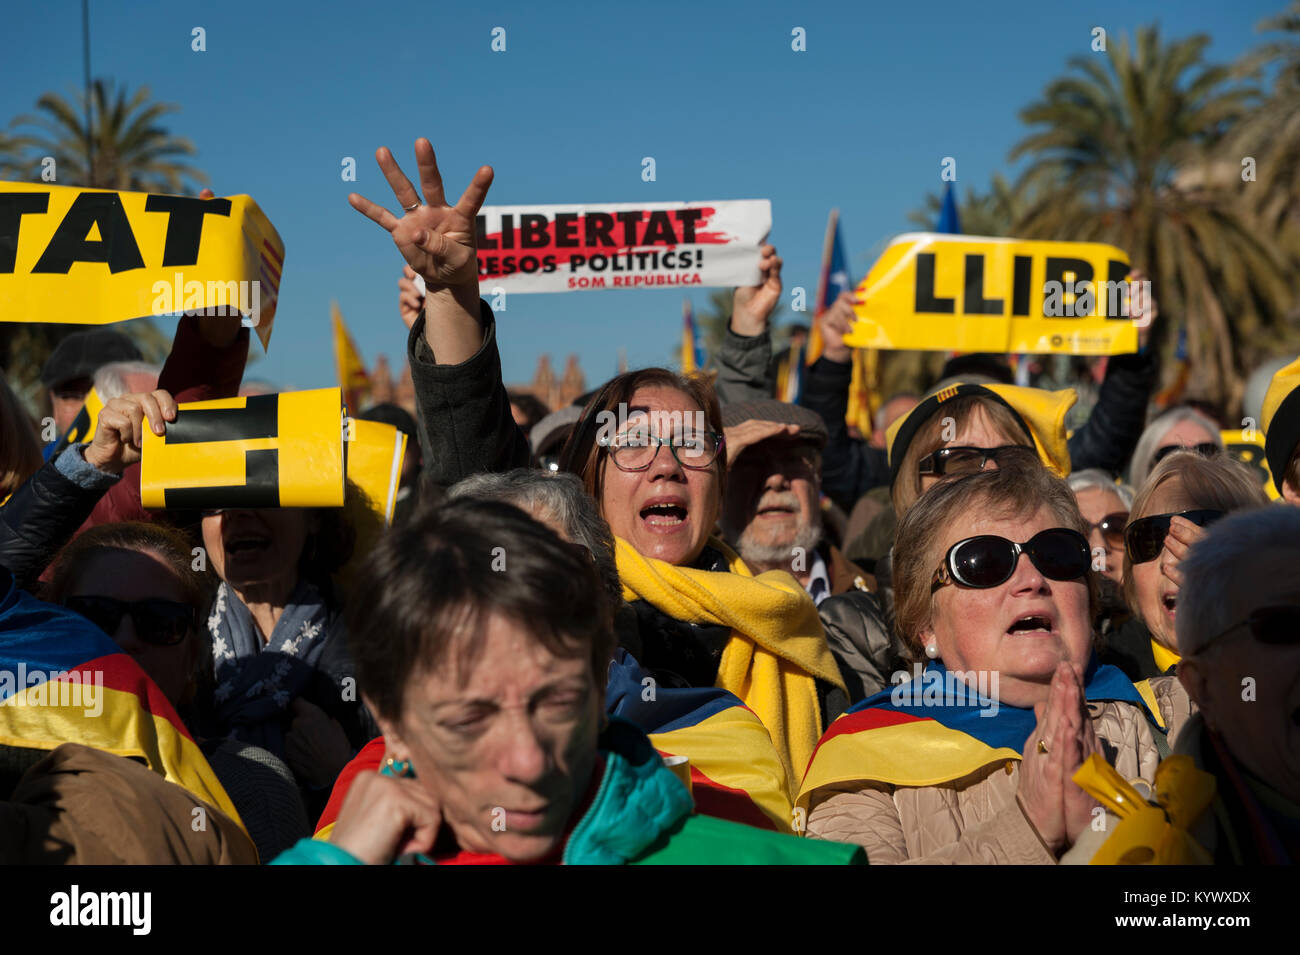 Barcelona, Spain. 17th January, 2018. People gather outside the Catalan parliament during a parliamentary session in Barcelona. A new Catalan parliament meets after a failed attempt at secession last year and amid imminent questions about the role played by fugitive politicians and imprisoned in the separatist majority of the chamber. Credit: Charlie Perez/Alamy Live News Stock Photo